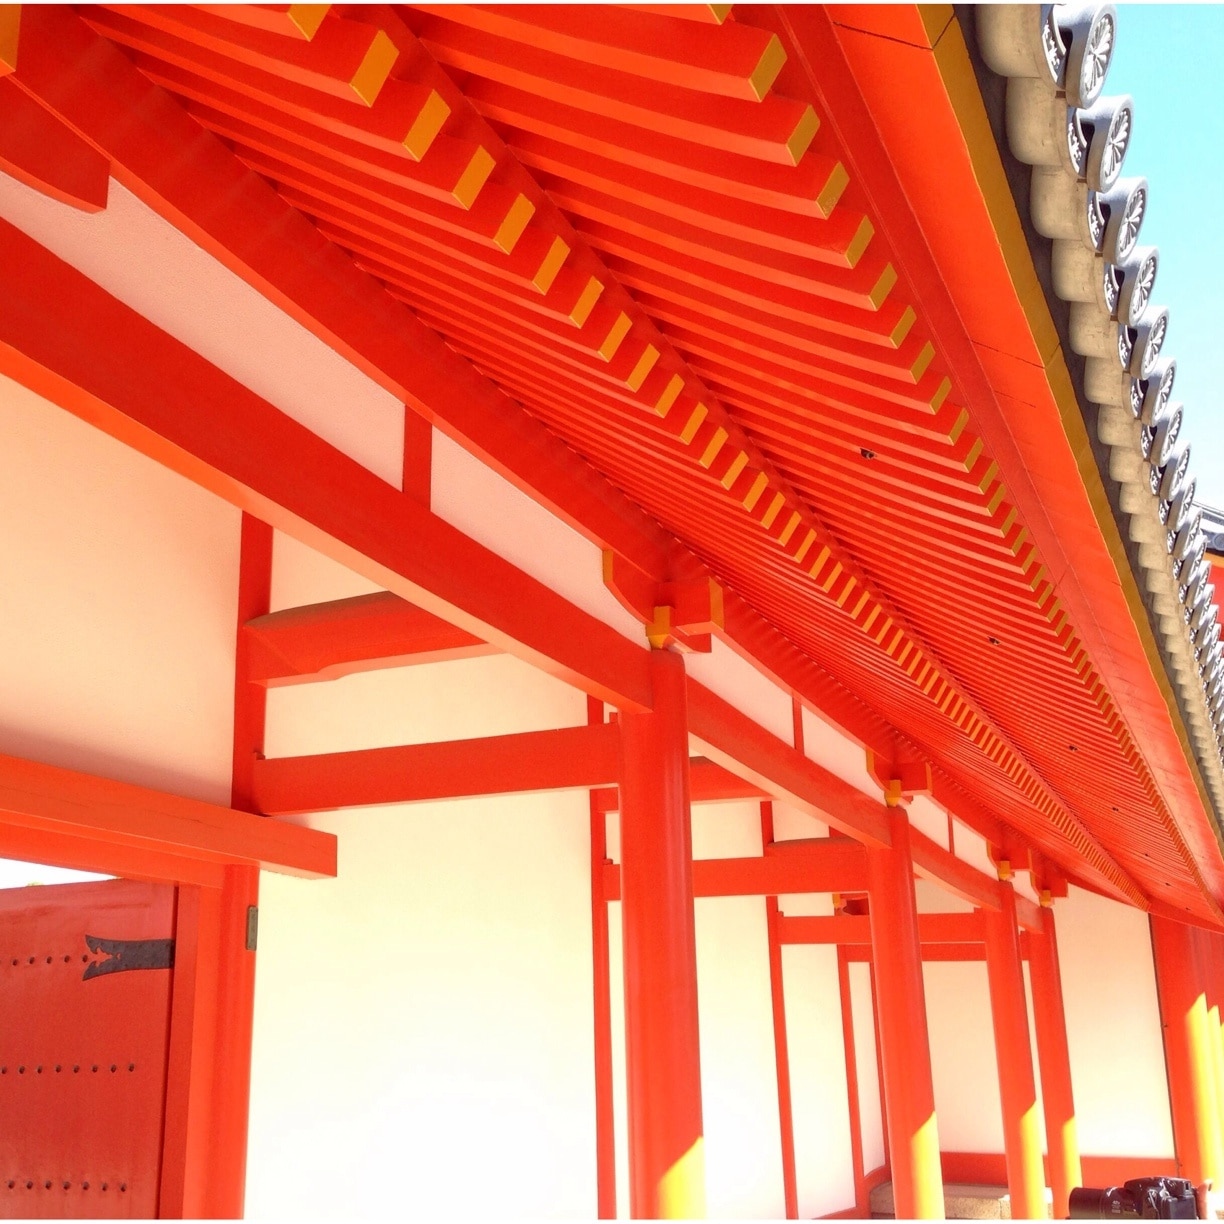 The colours of Imperial palace in Kyoto